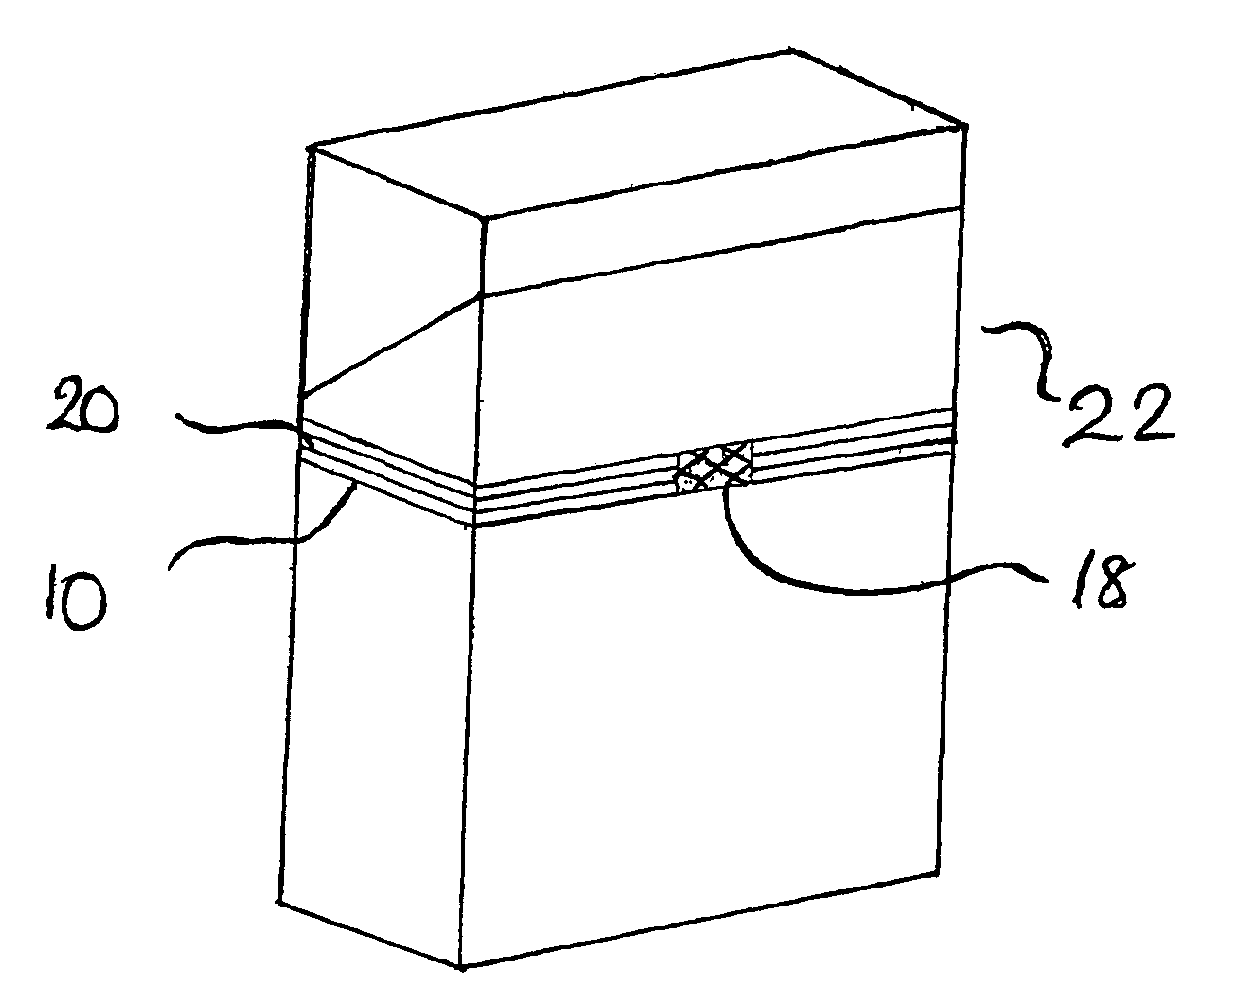 Method for applying tear tape with discrete fiscal marks for discrete packages